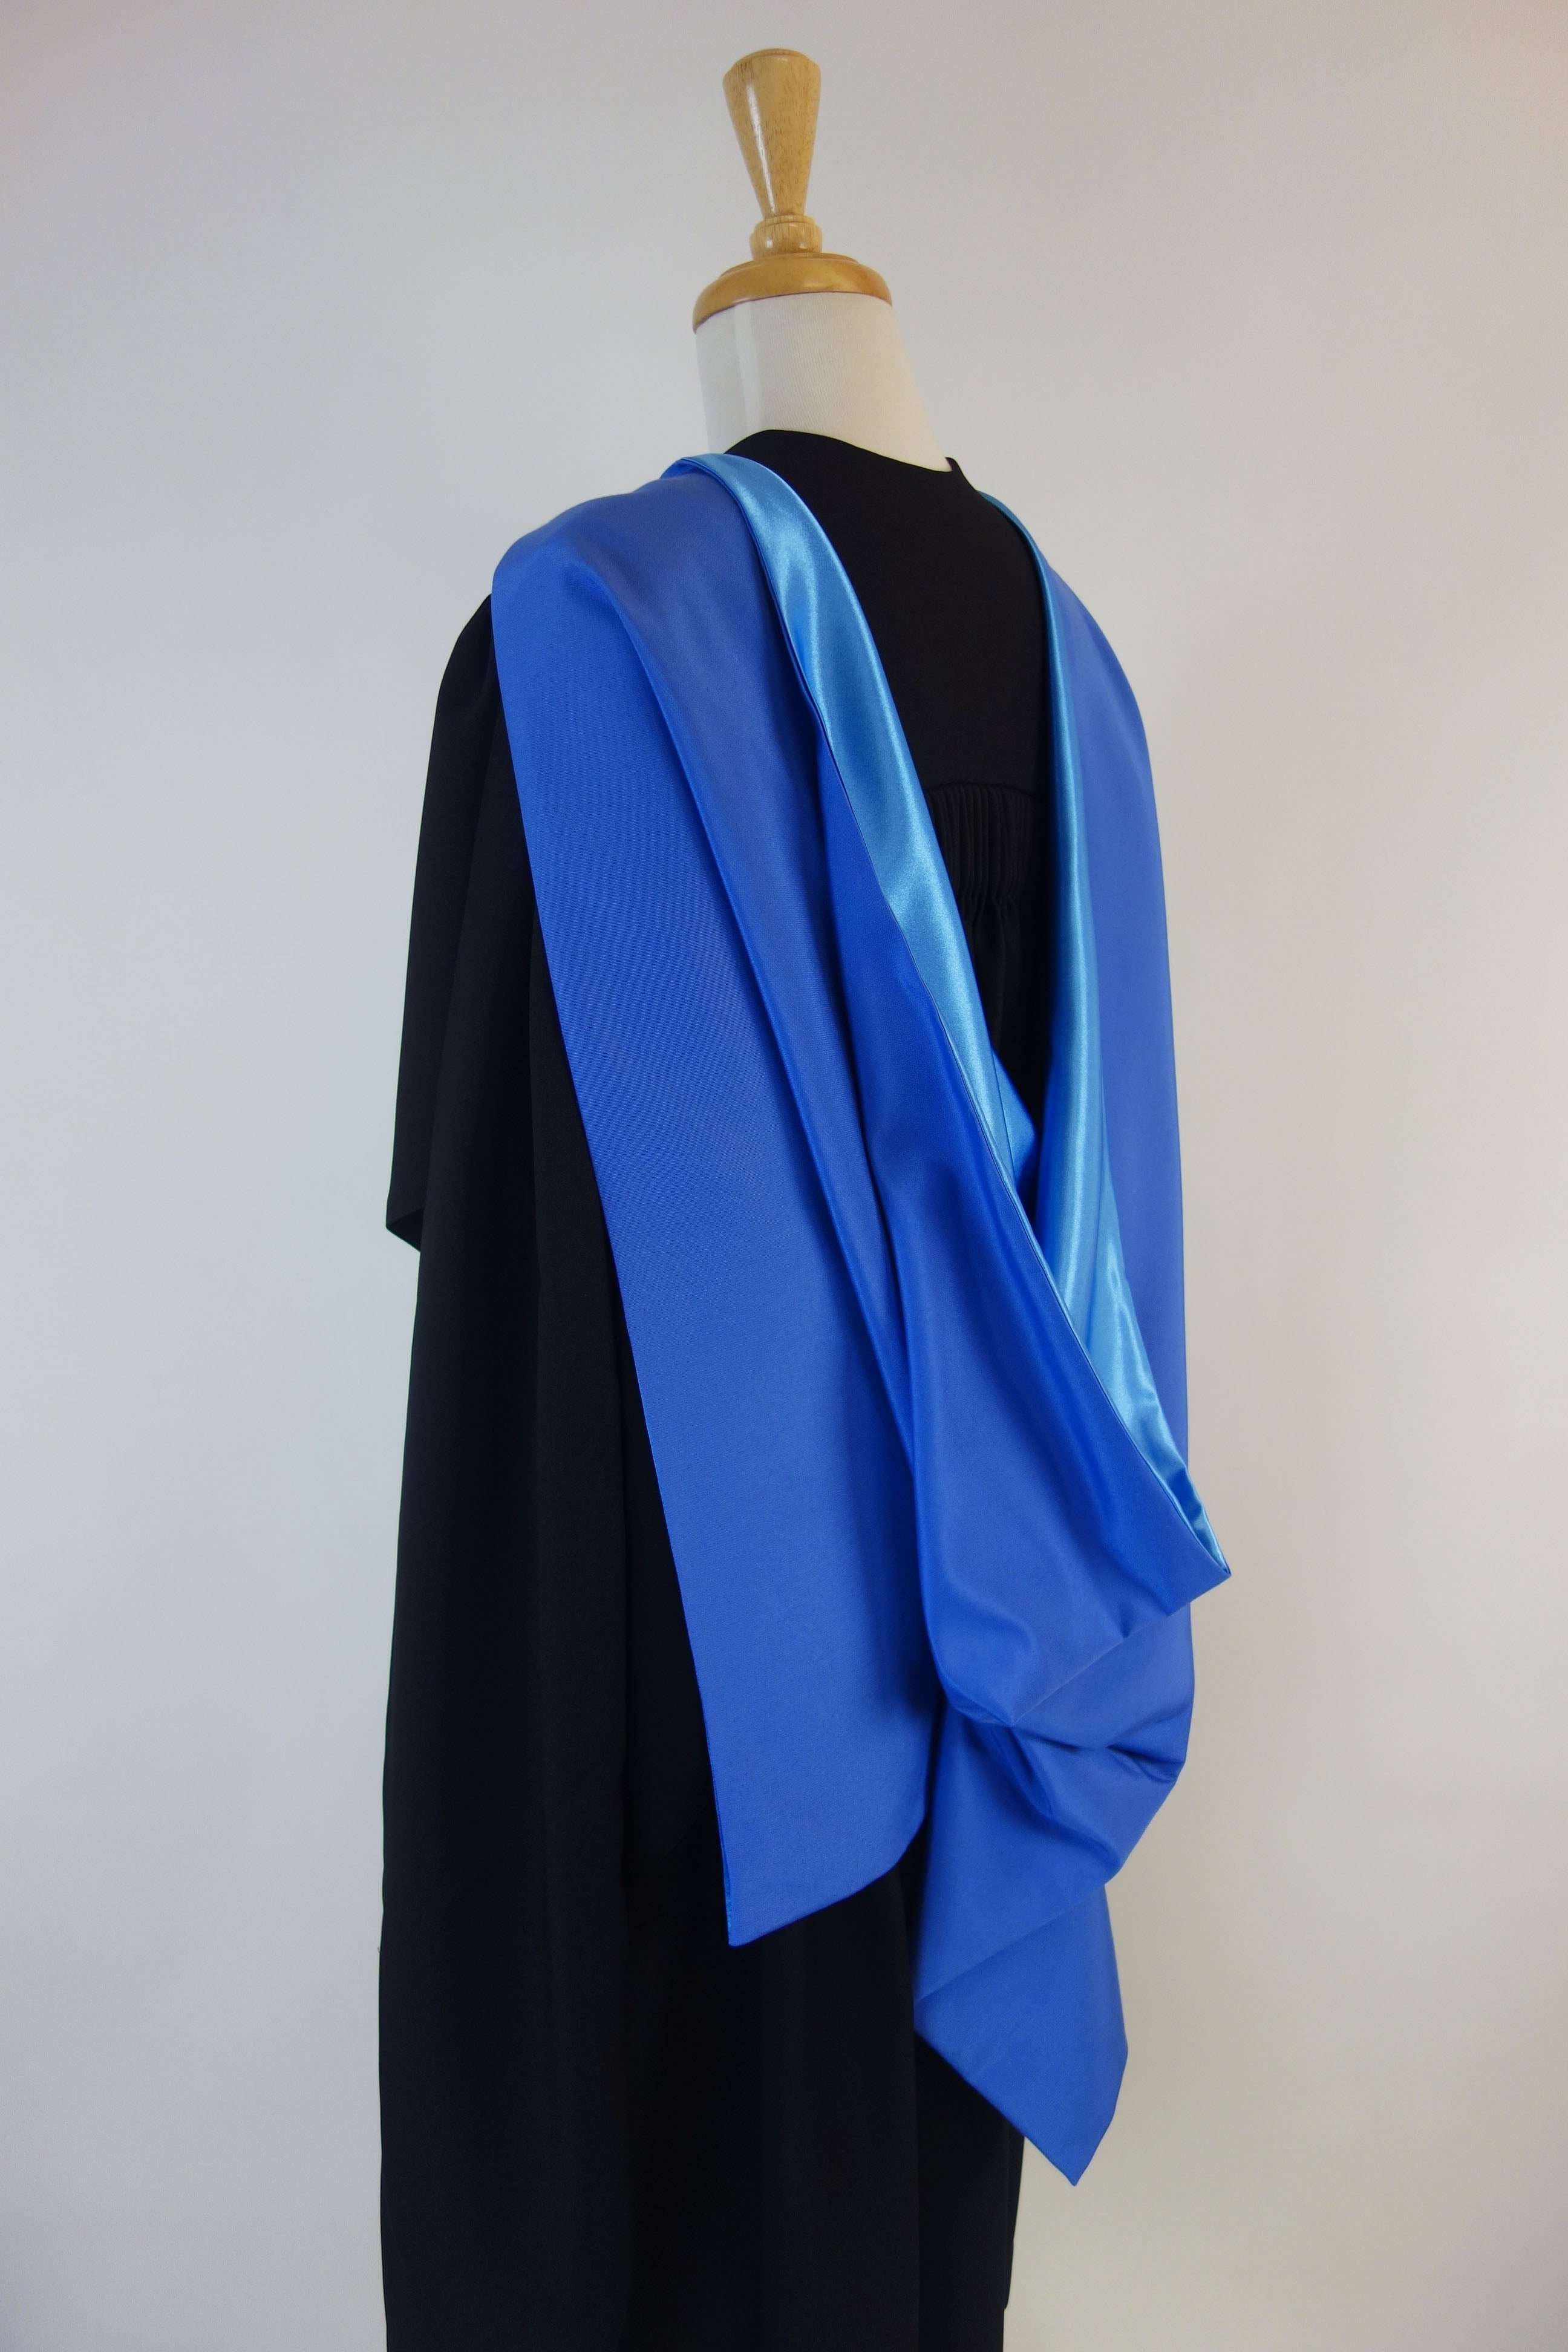 Graduation Gown Pictures | Download Free Images on Unsplash